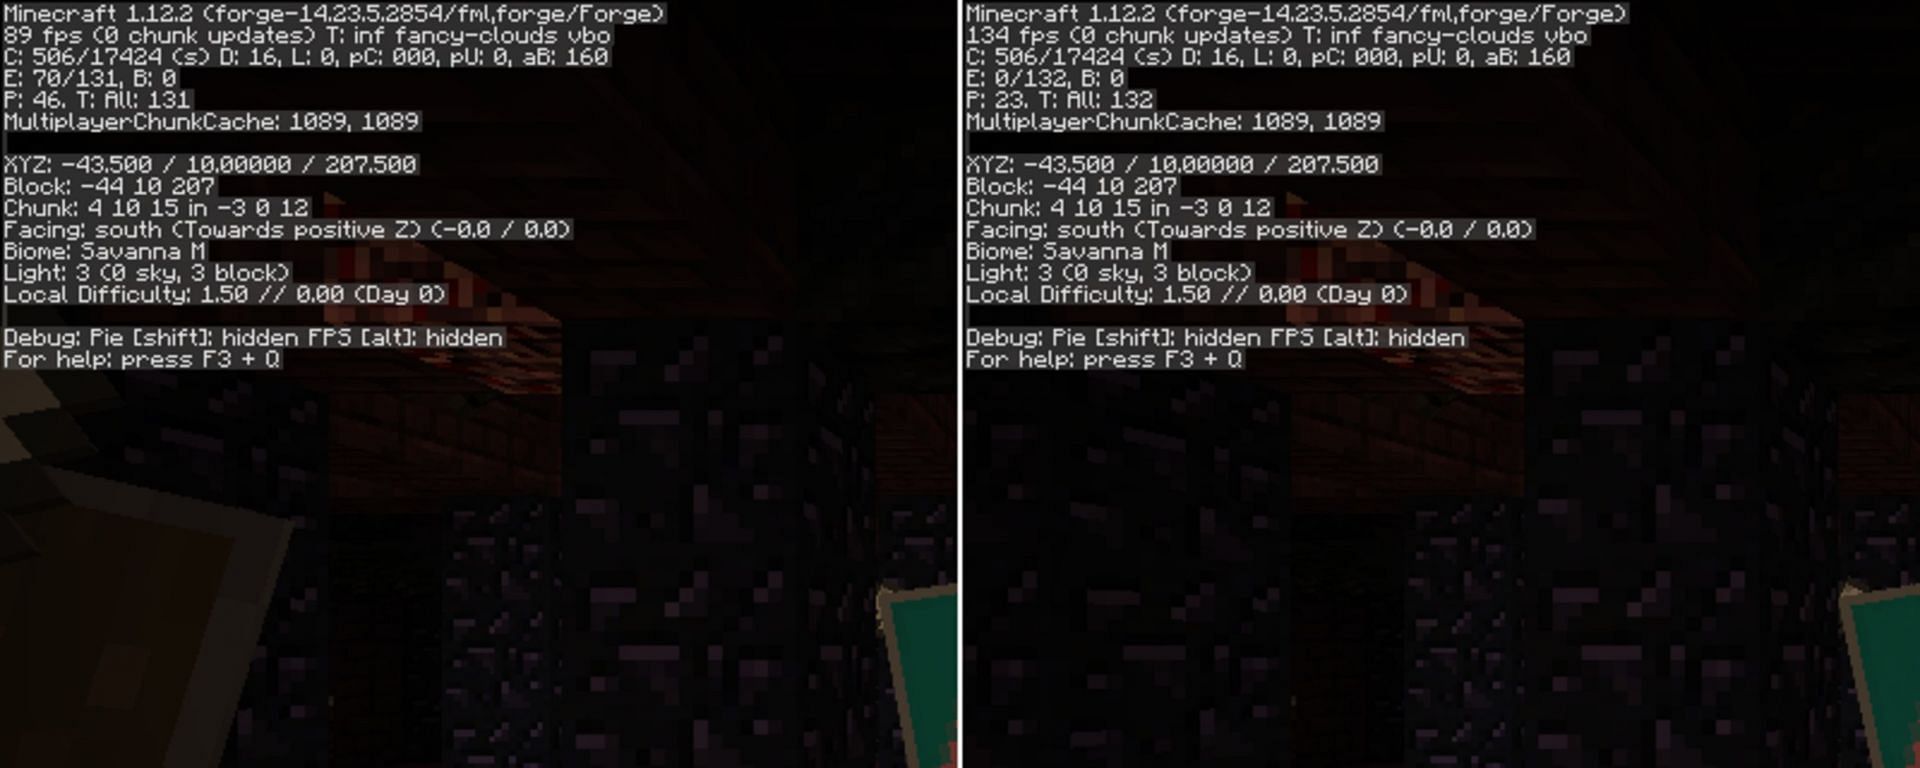 Entity Culling completes the rendering steps that Minecraft already implements (Image via tr9zw/CurseForge)